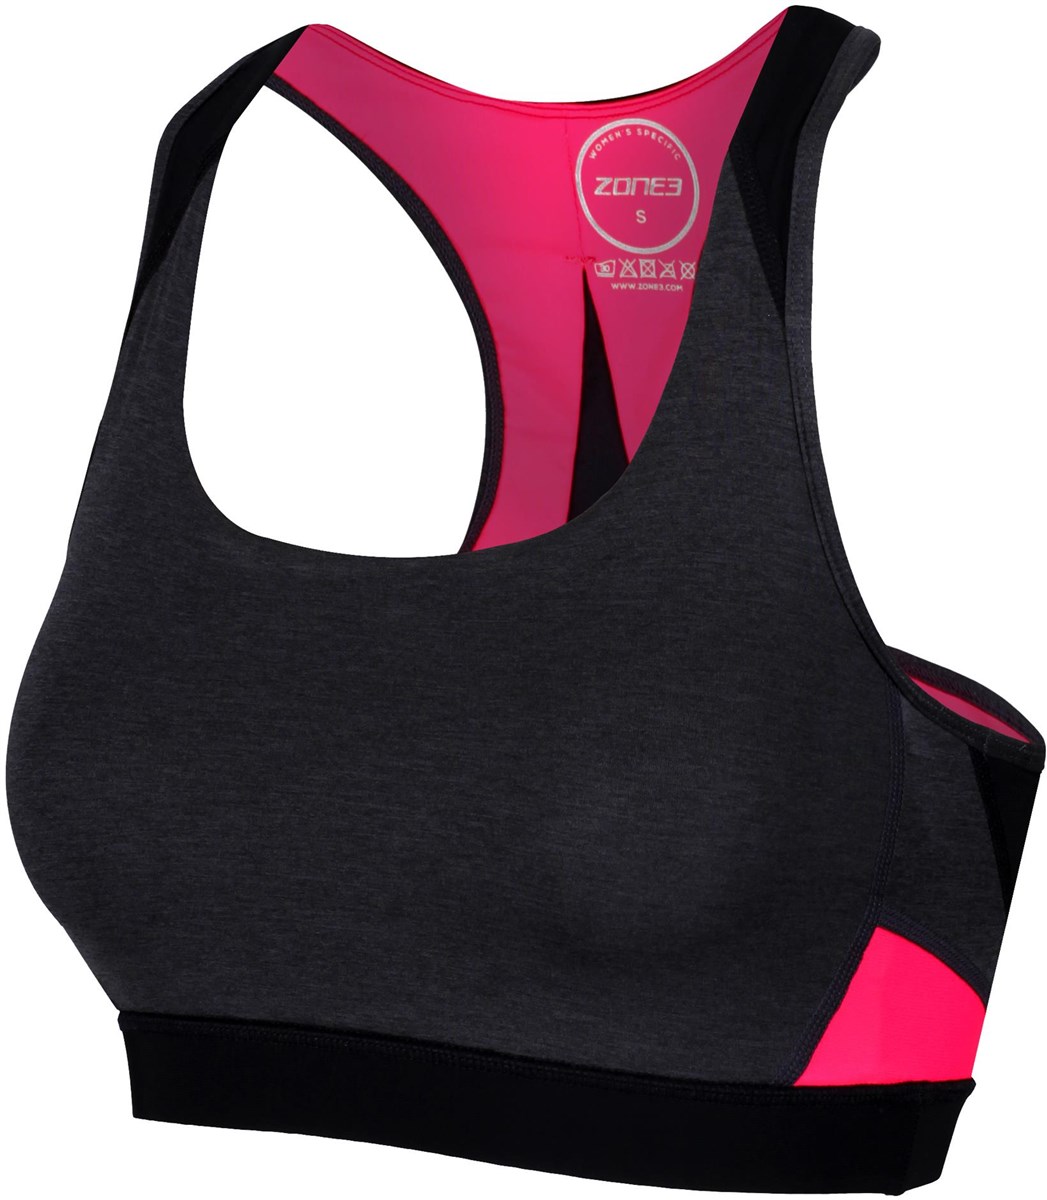 Zone3 Performance Culture Womens Crop Top product image